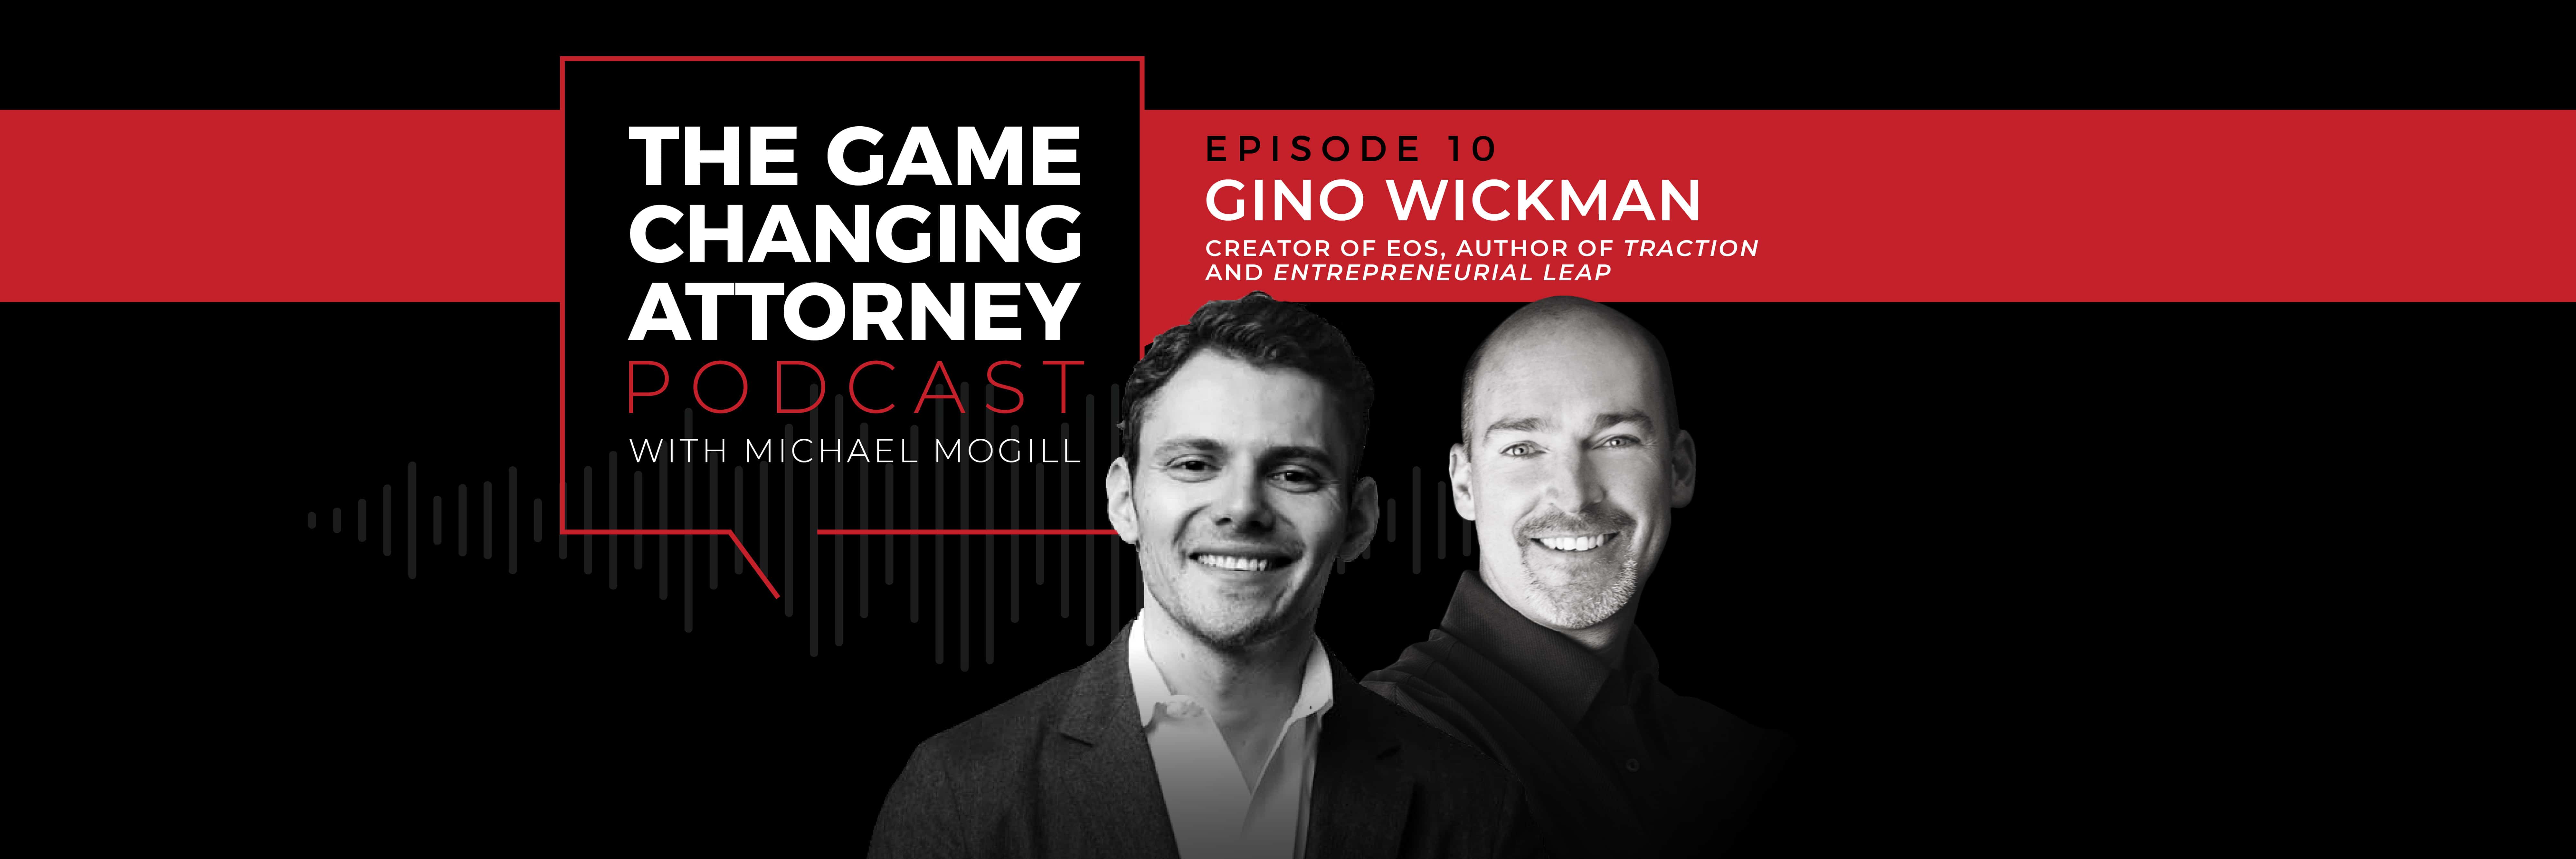 Gino Wickman - The Game Changing Attorney Podcast - Desktop